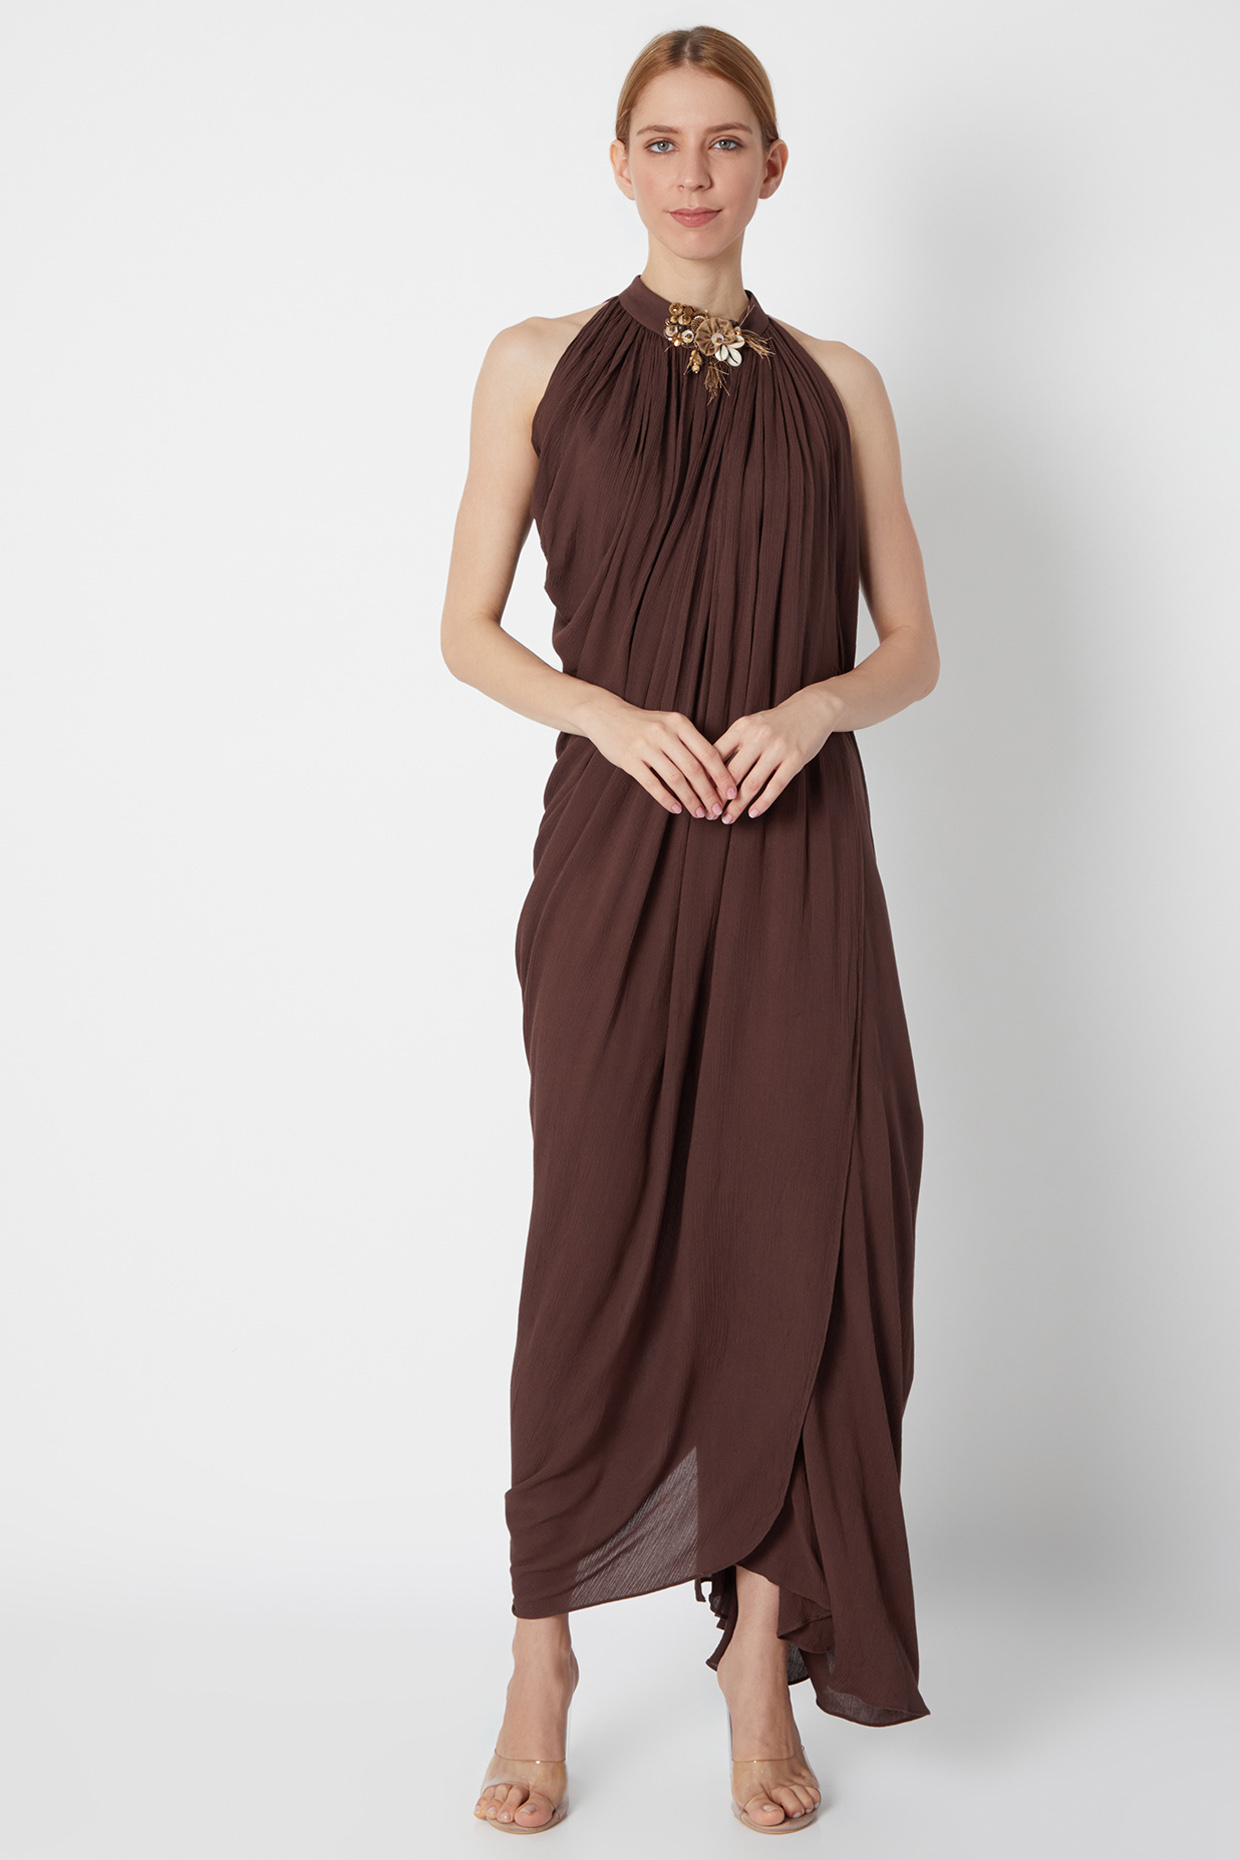 Brown Draped Dress With In-Cut Collar